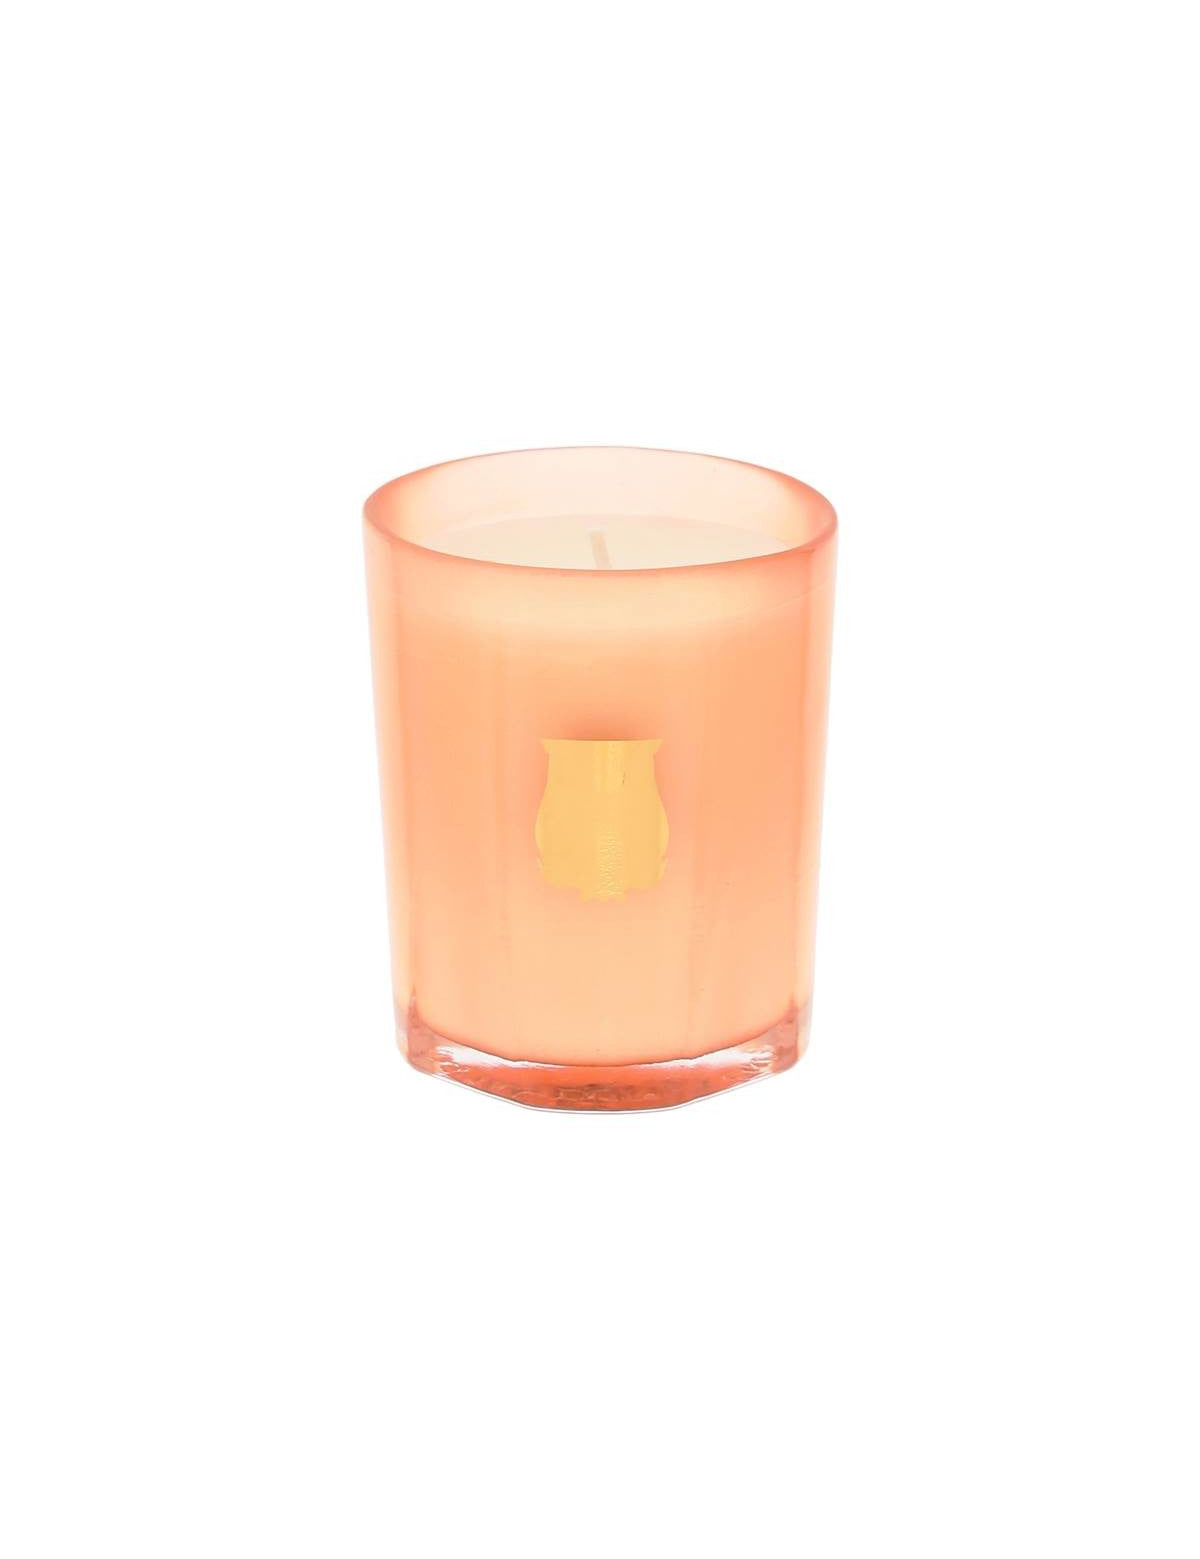 cire-trvdon-tuileries-scented-candle-70-g.jpg